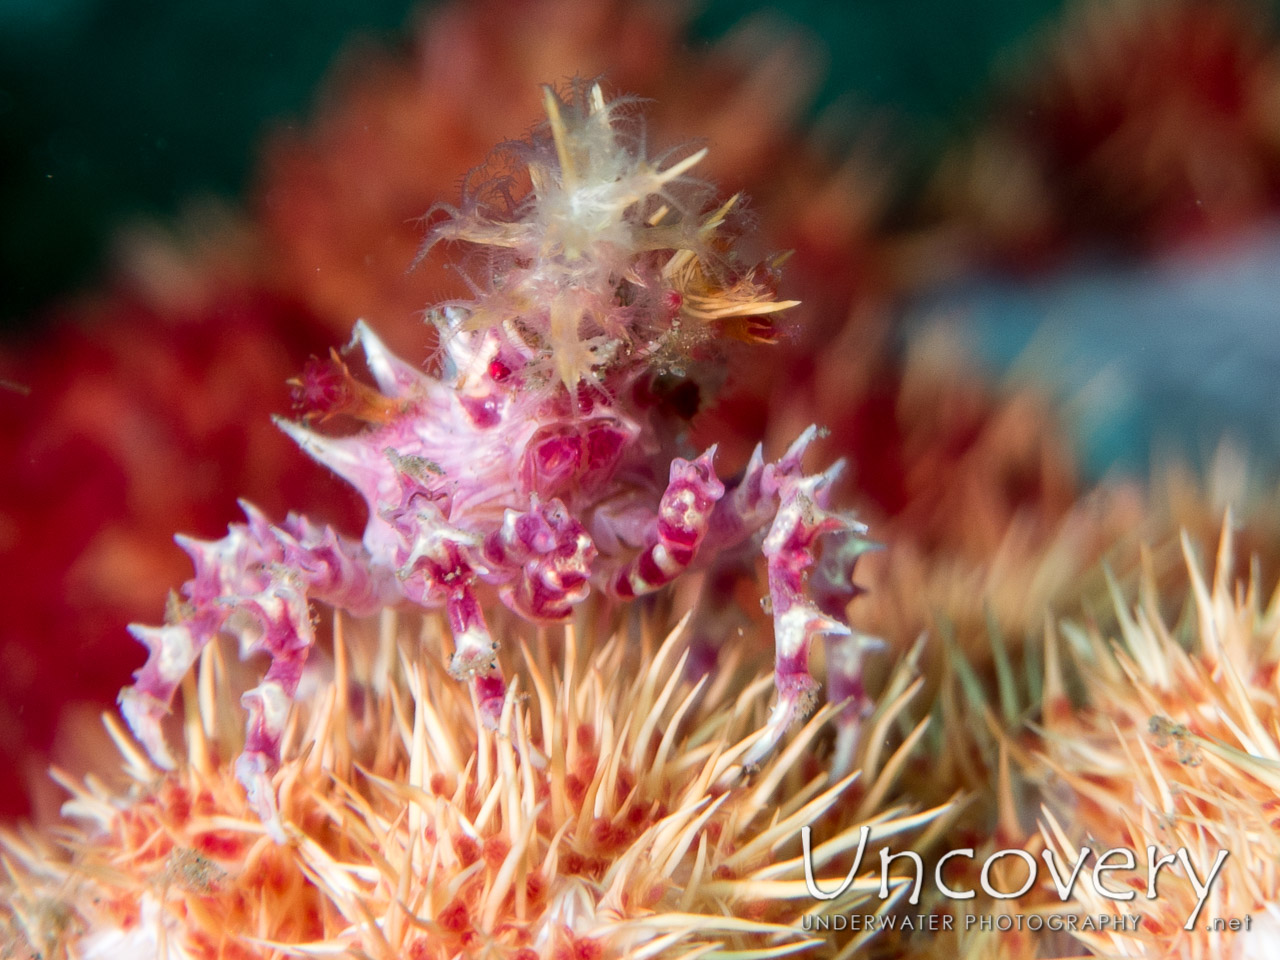 Candy Crab (hoplophrys Oatesi), photo taken in Indonesia, North Sulawesi, Lembeh Strait, Makawide 2